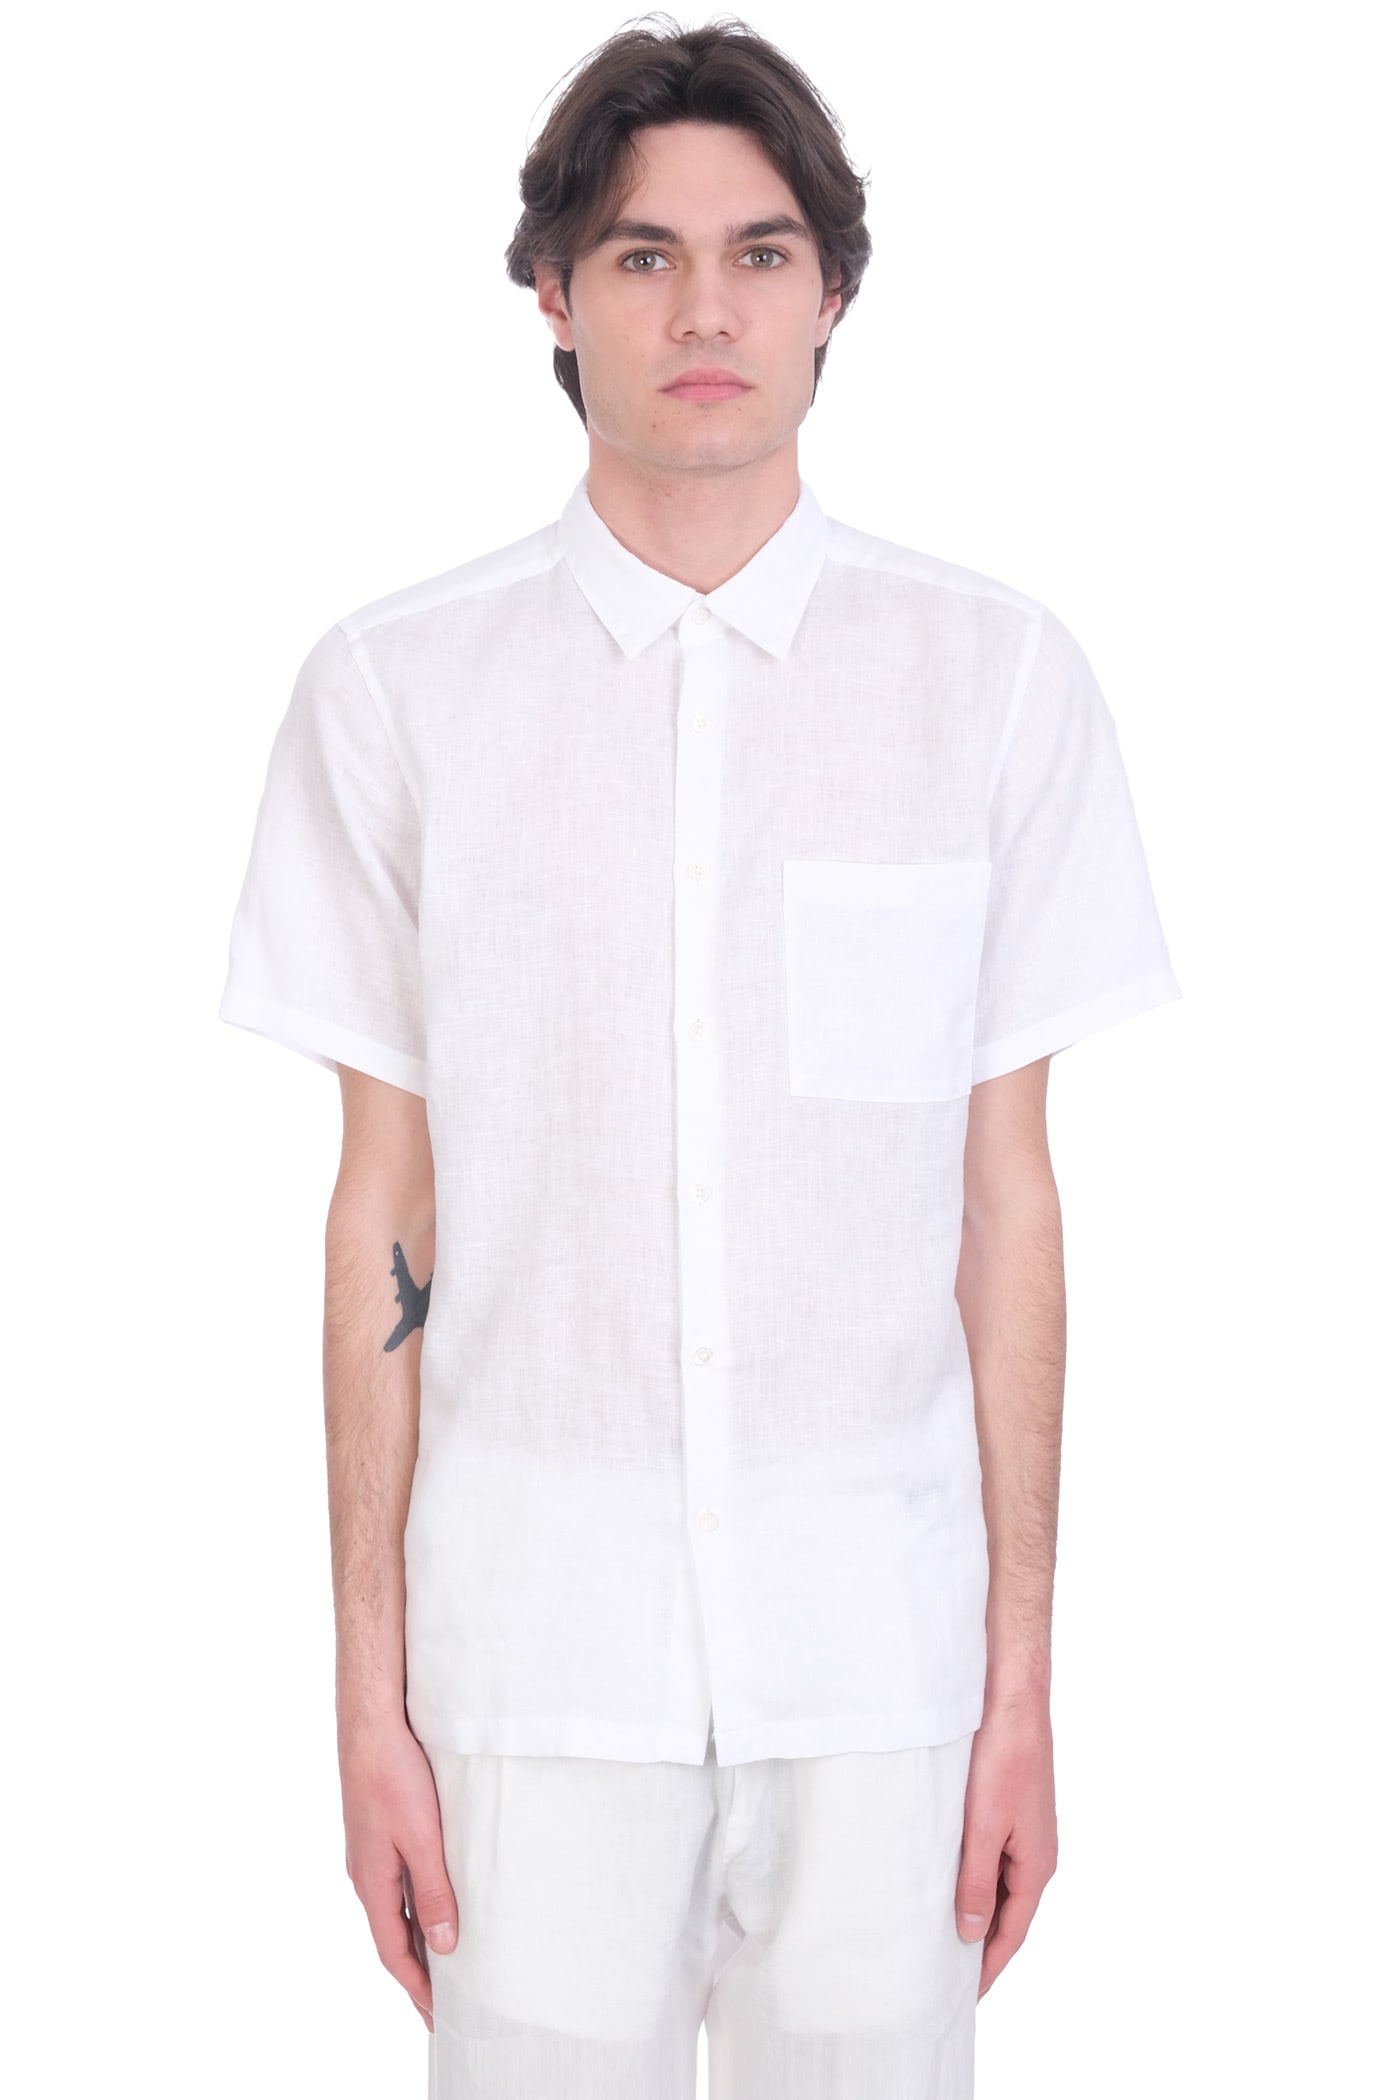 Theory Shirt In White Linen